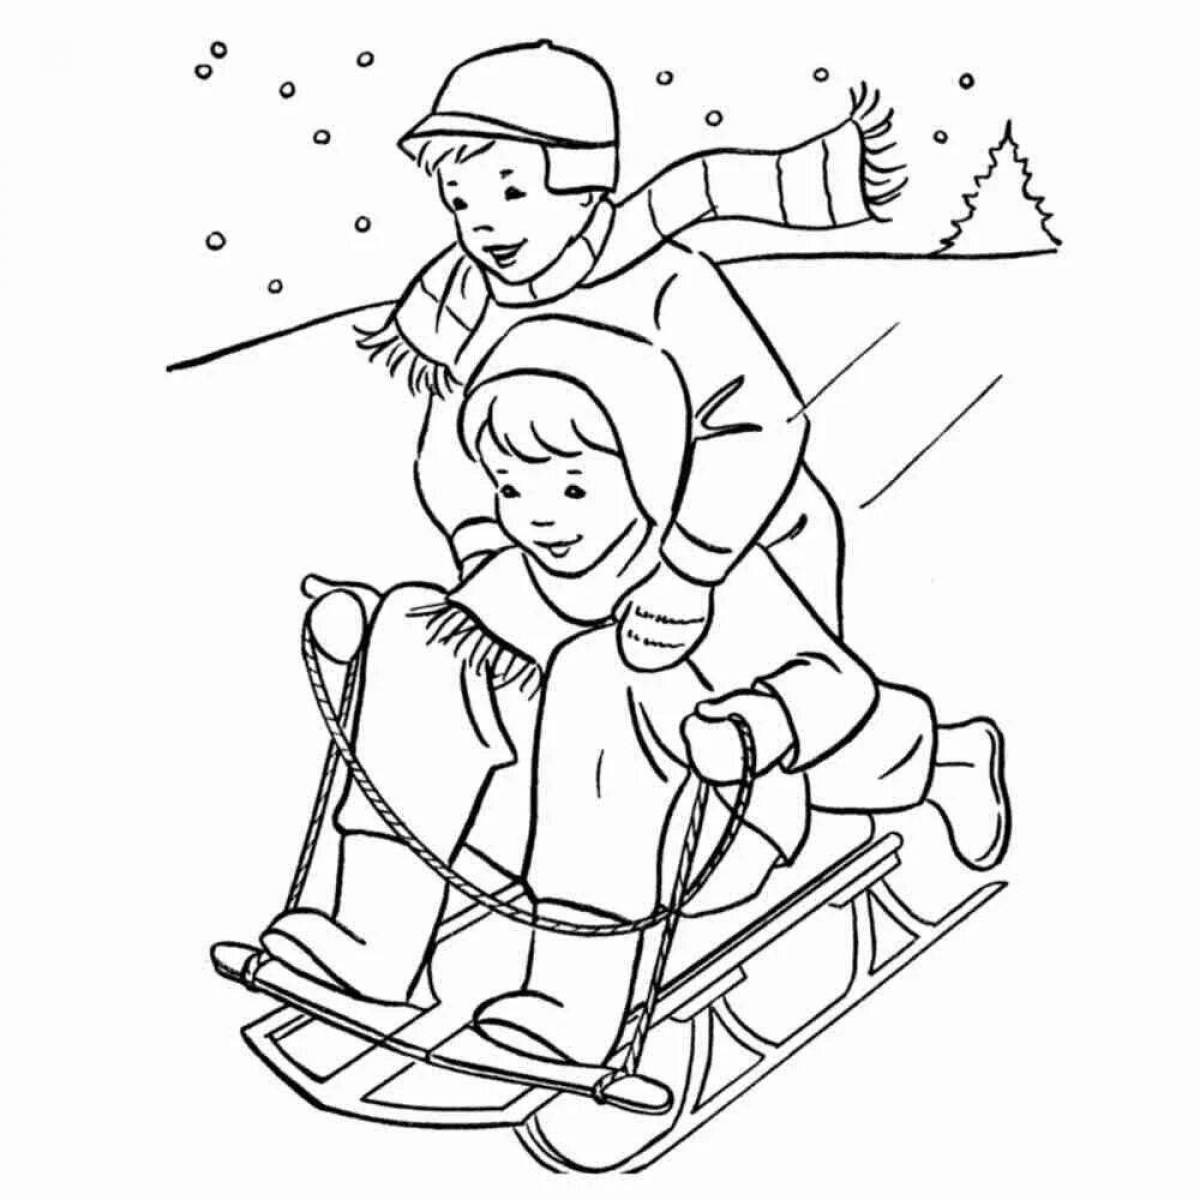 Majestic winter slide coloring page